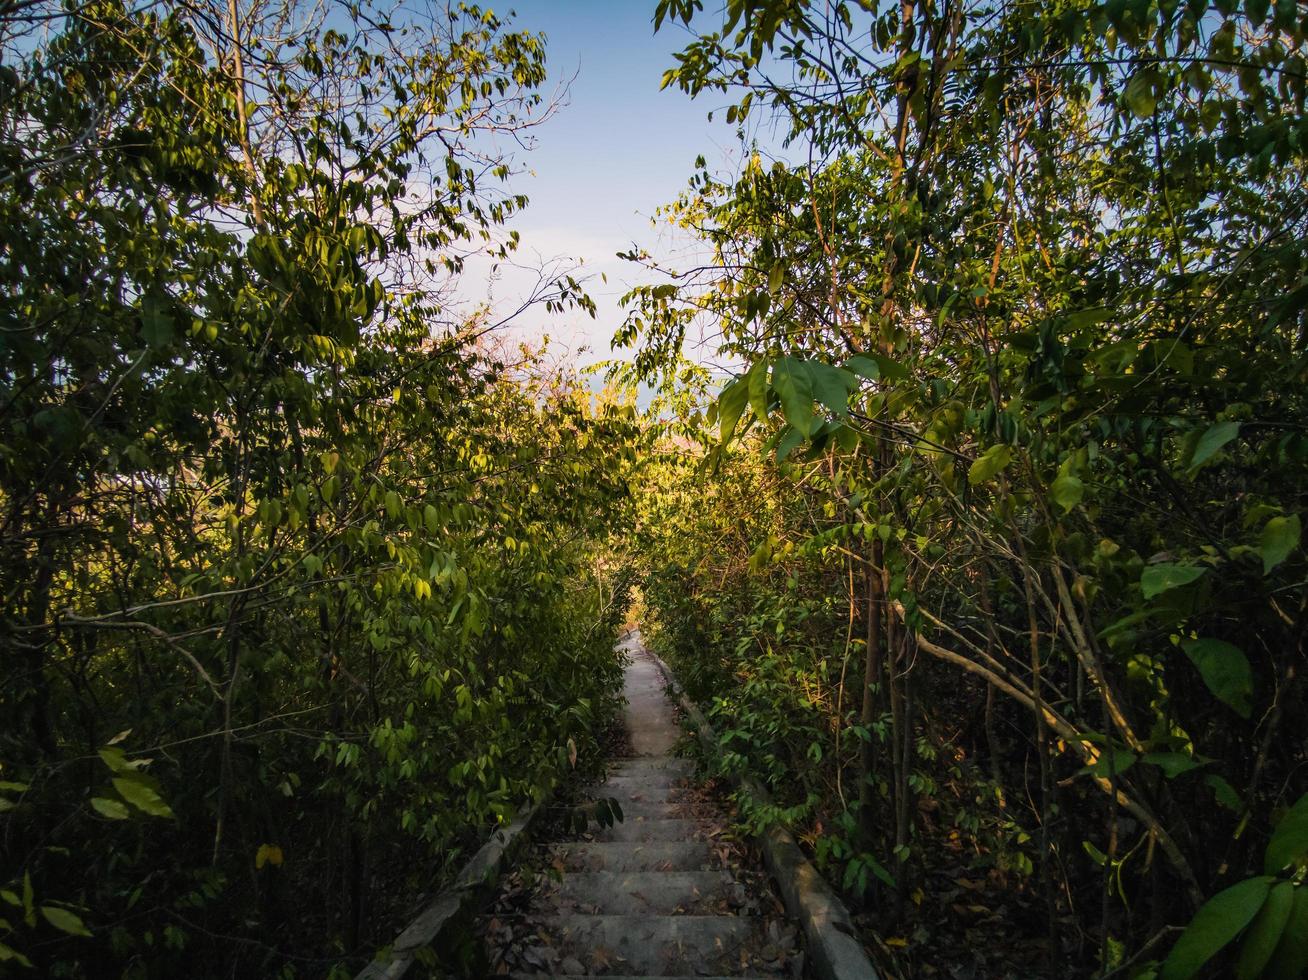 Beautiful nature and stairway to the top of koh lan island pattaya Thailand.Koh lan island is the Famous island near Pattaya city the Travel Destination in Thailand. photo